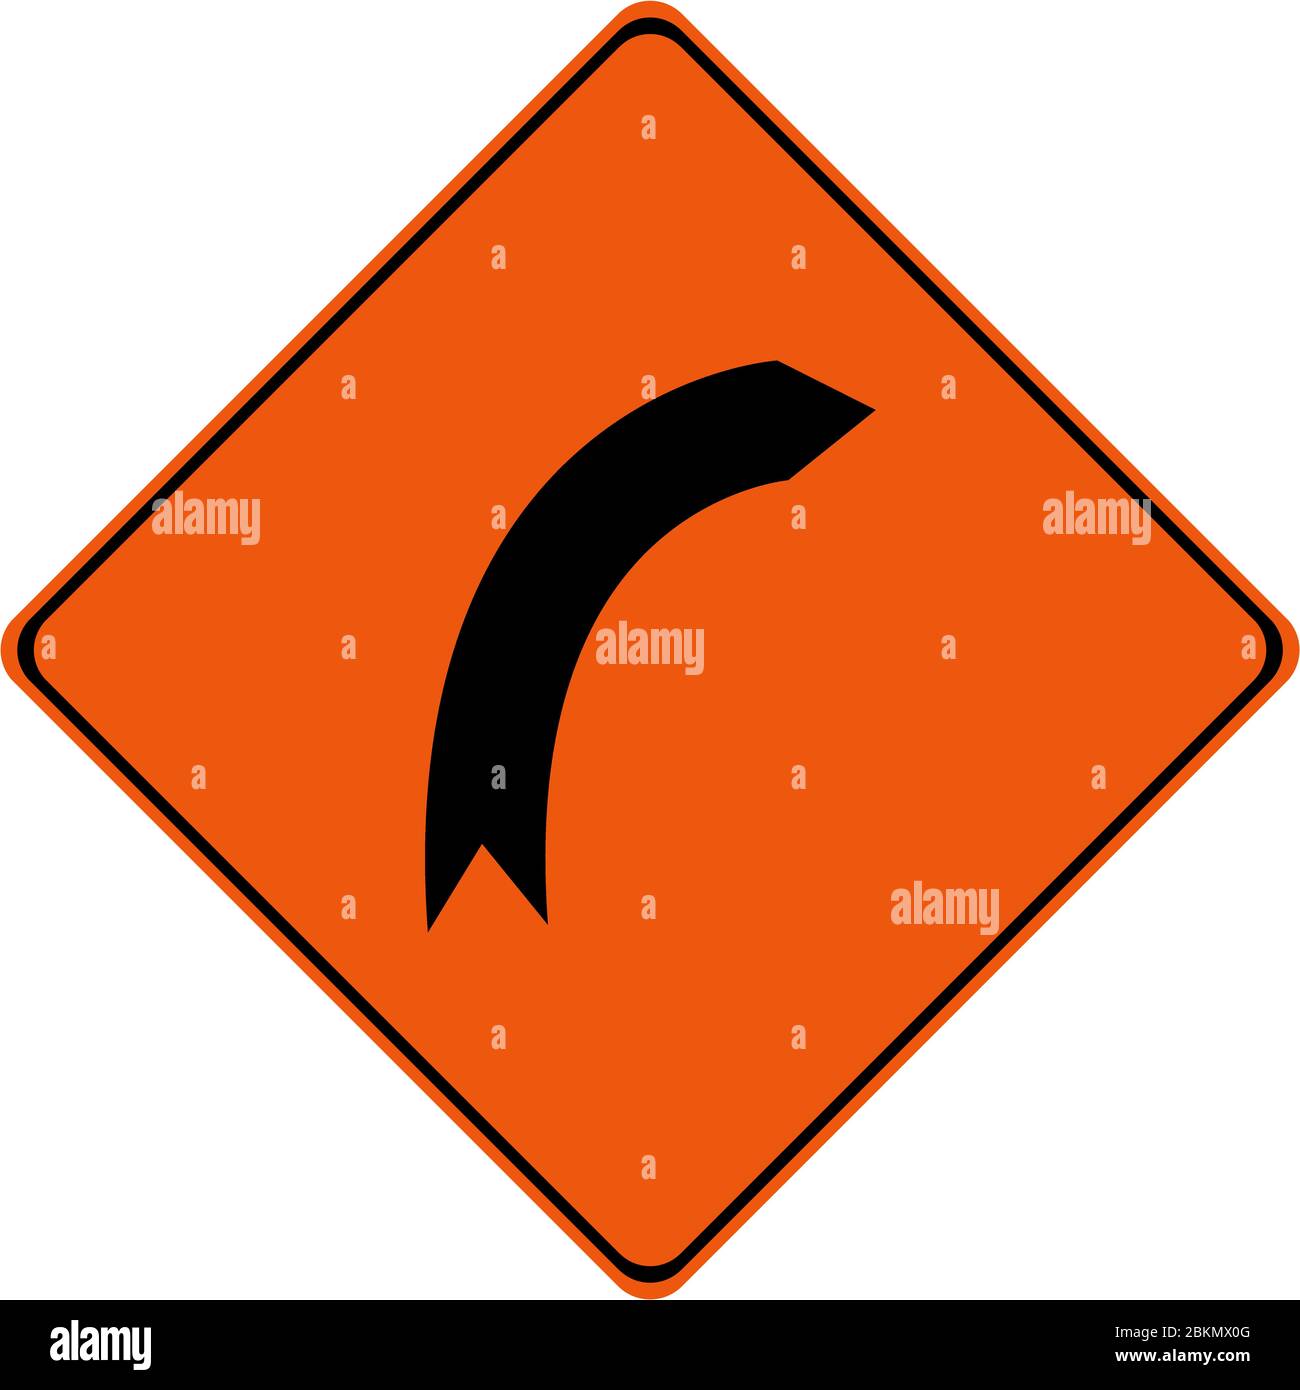 Warning sign with right bend symbol Stock Photo